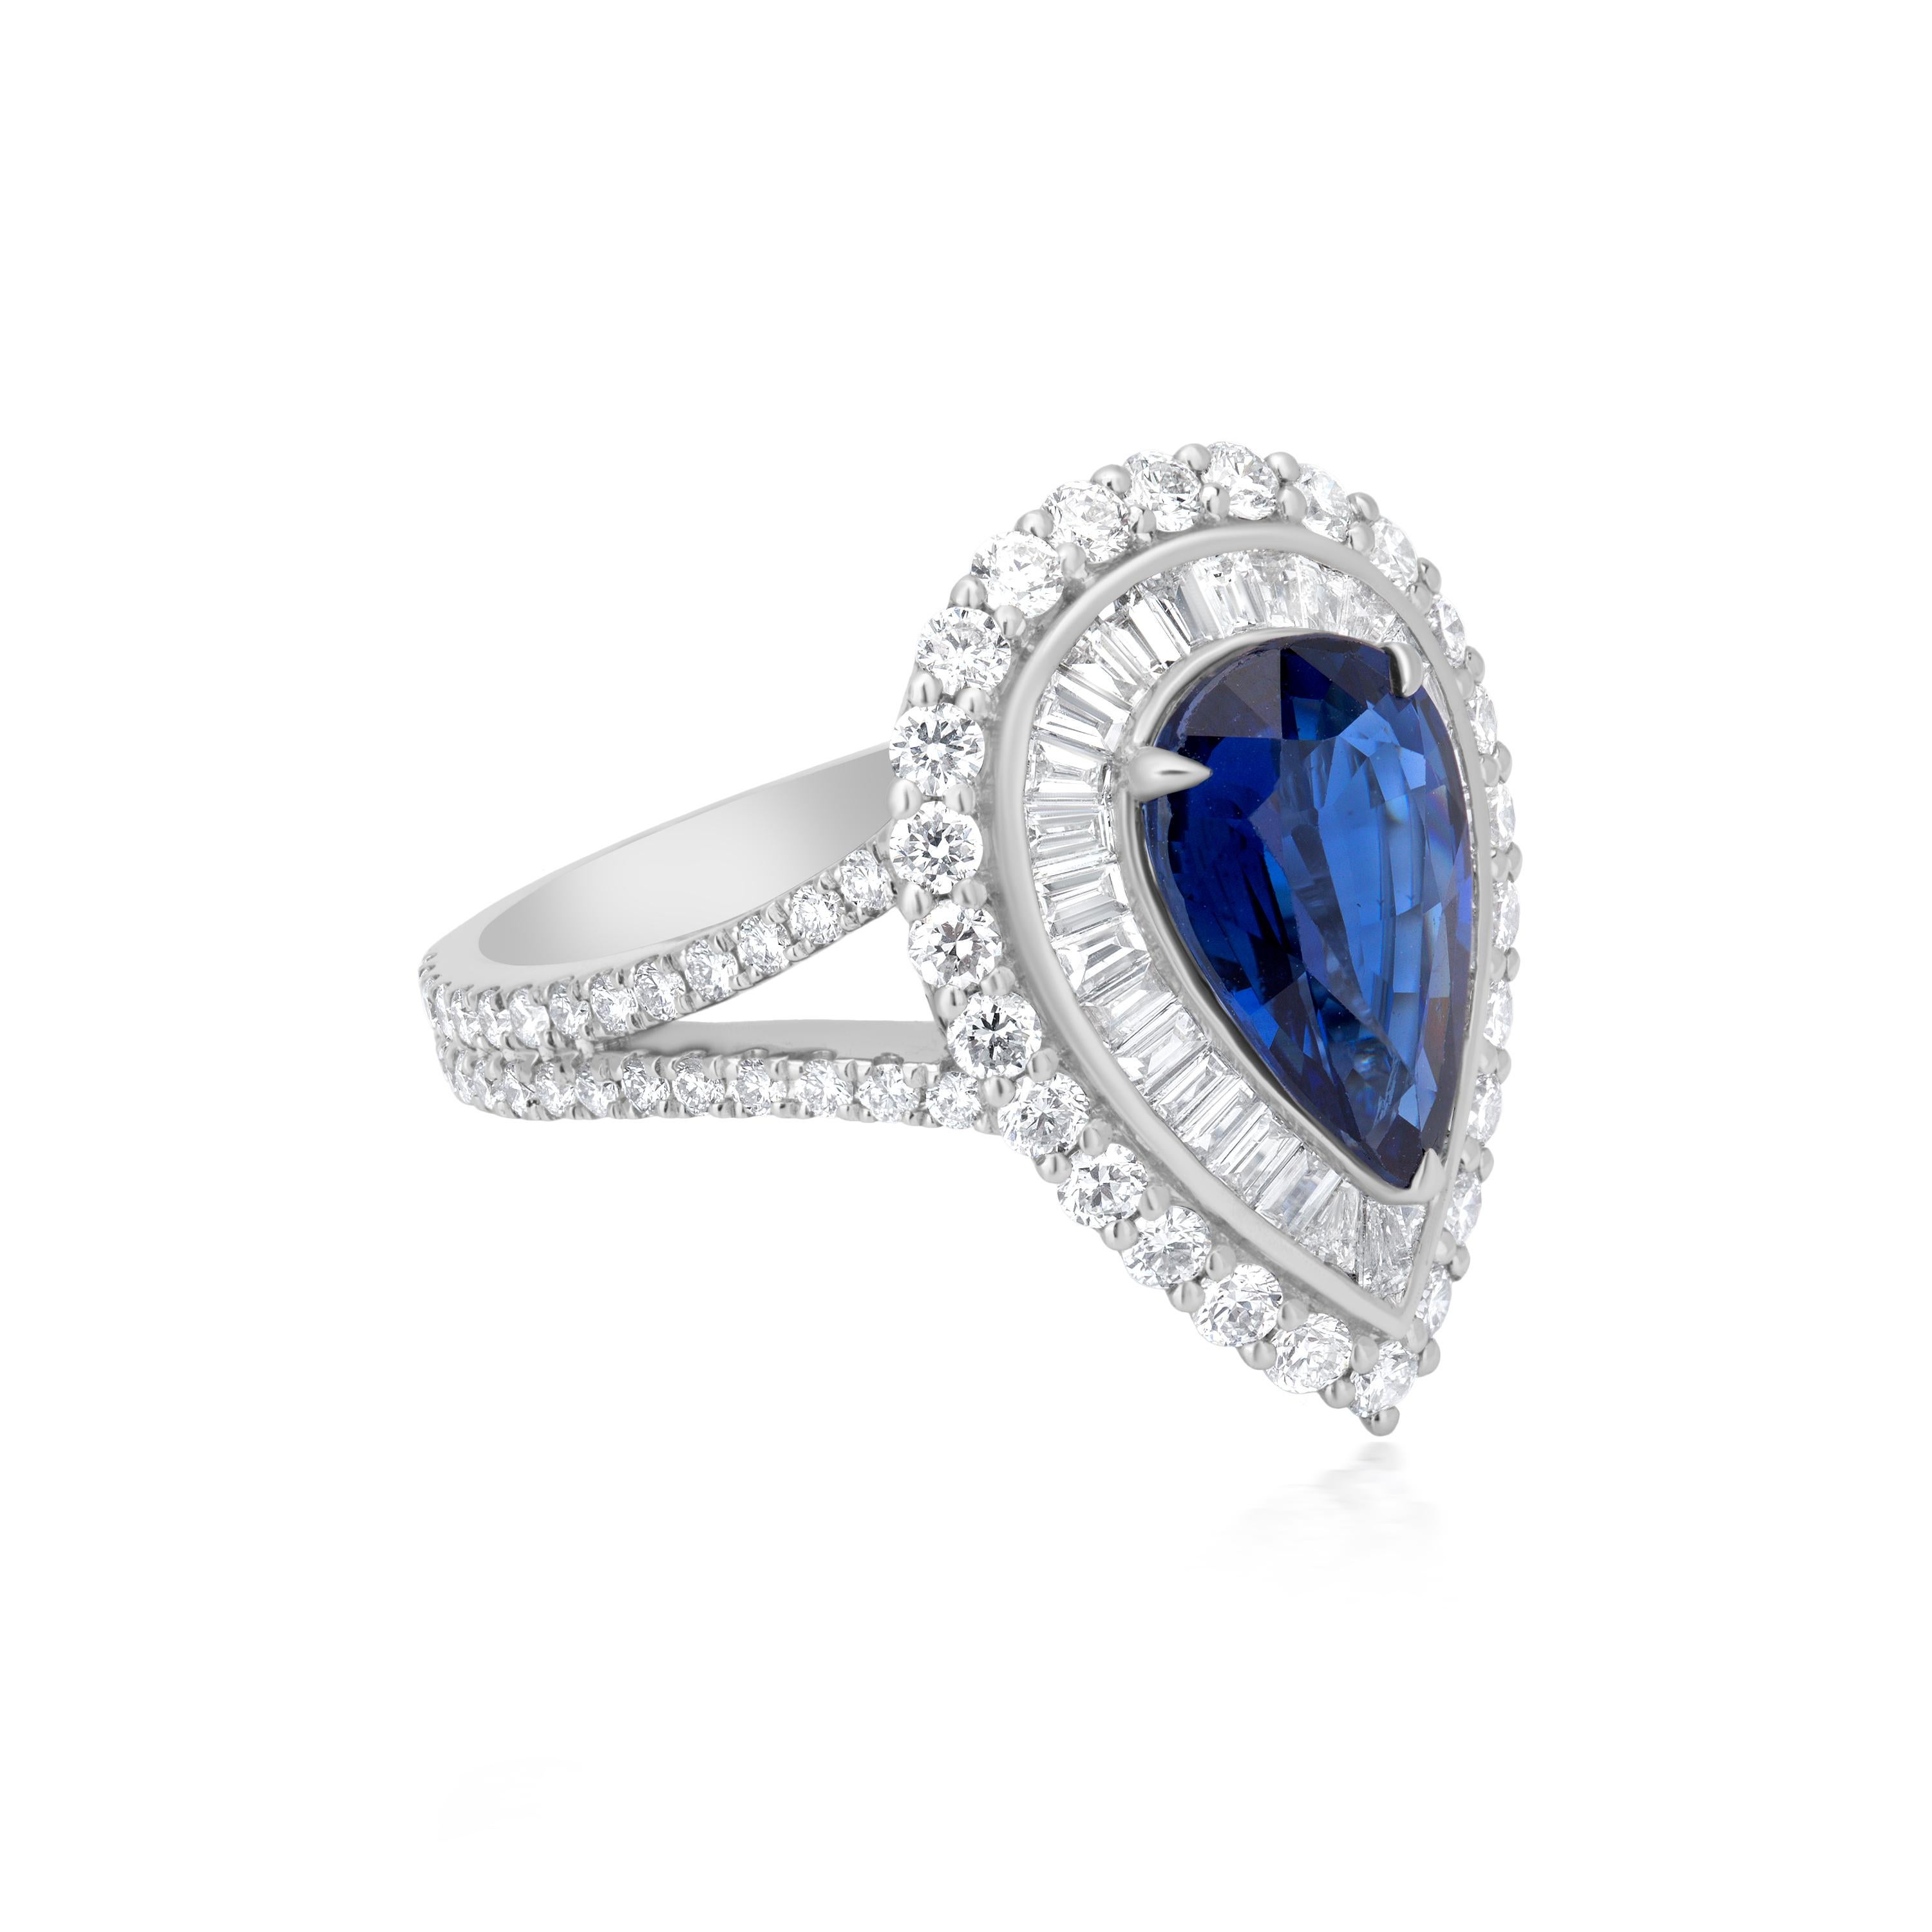 Contemporary Nigaam 4.38 Carat T.W. Blue Sapphire and Diamond Cluster Ring in 18k White Gold